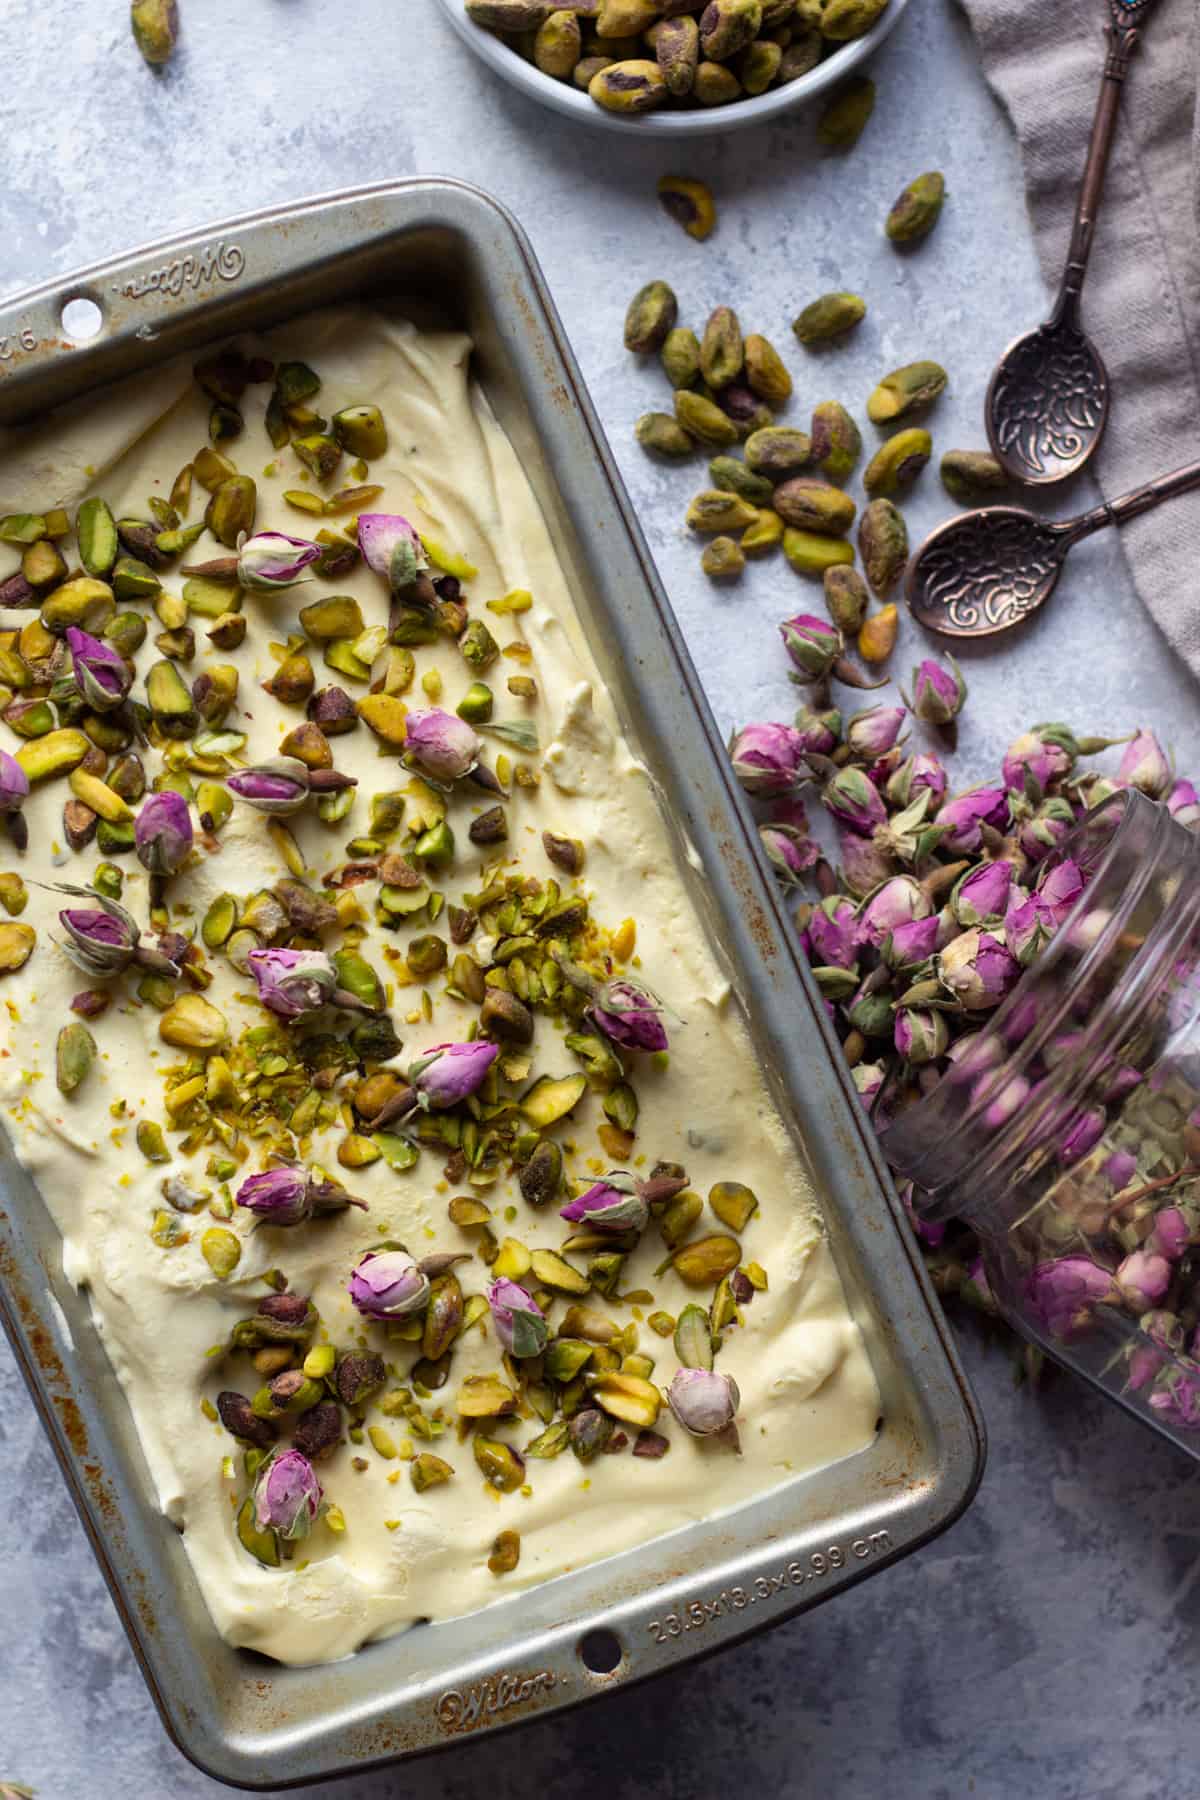 This no churn saffron ice cream is the best. Delicious homemade ice cream made with saffron, cardamom and pistachios is the perfect treat. 